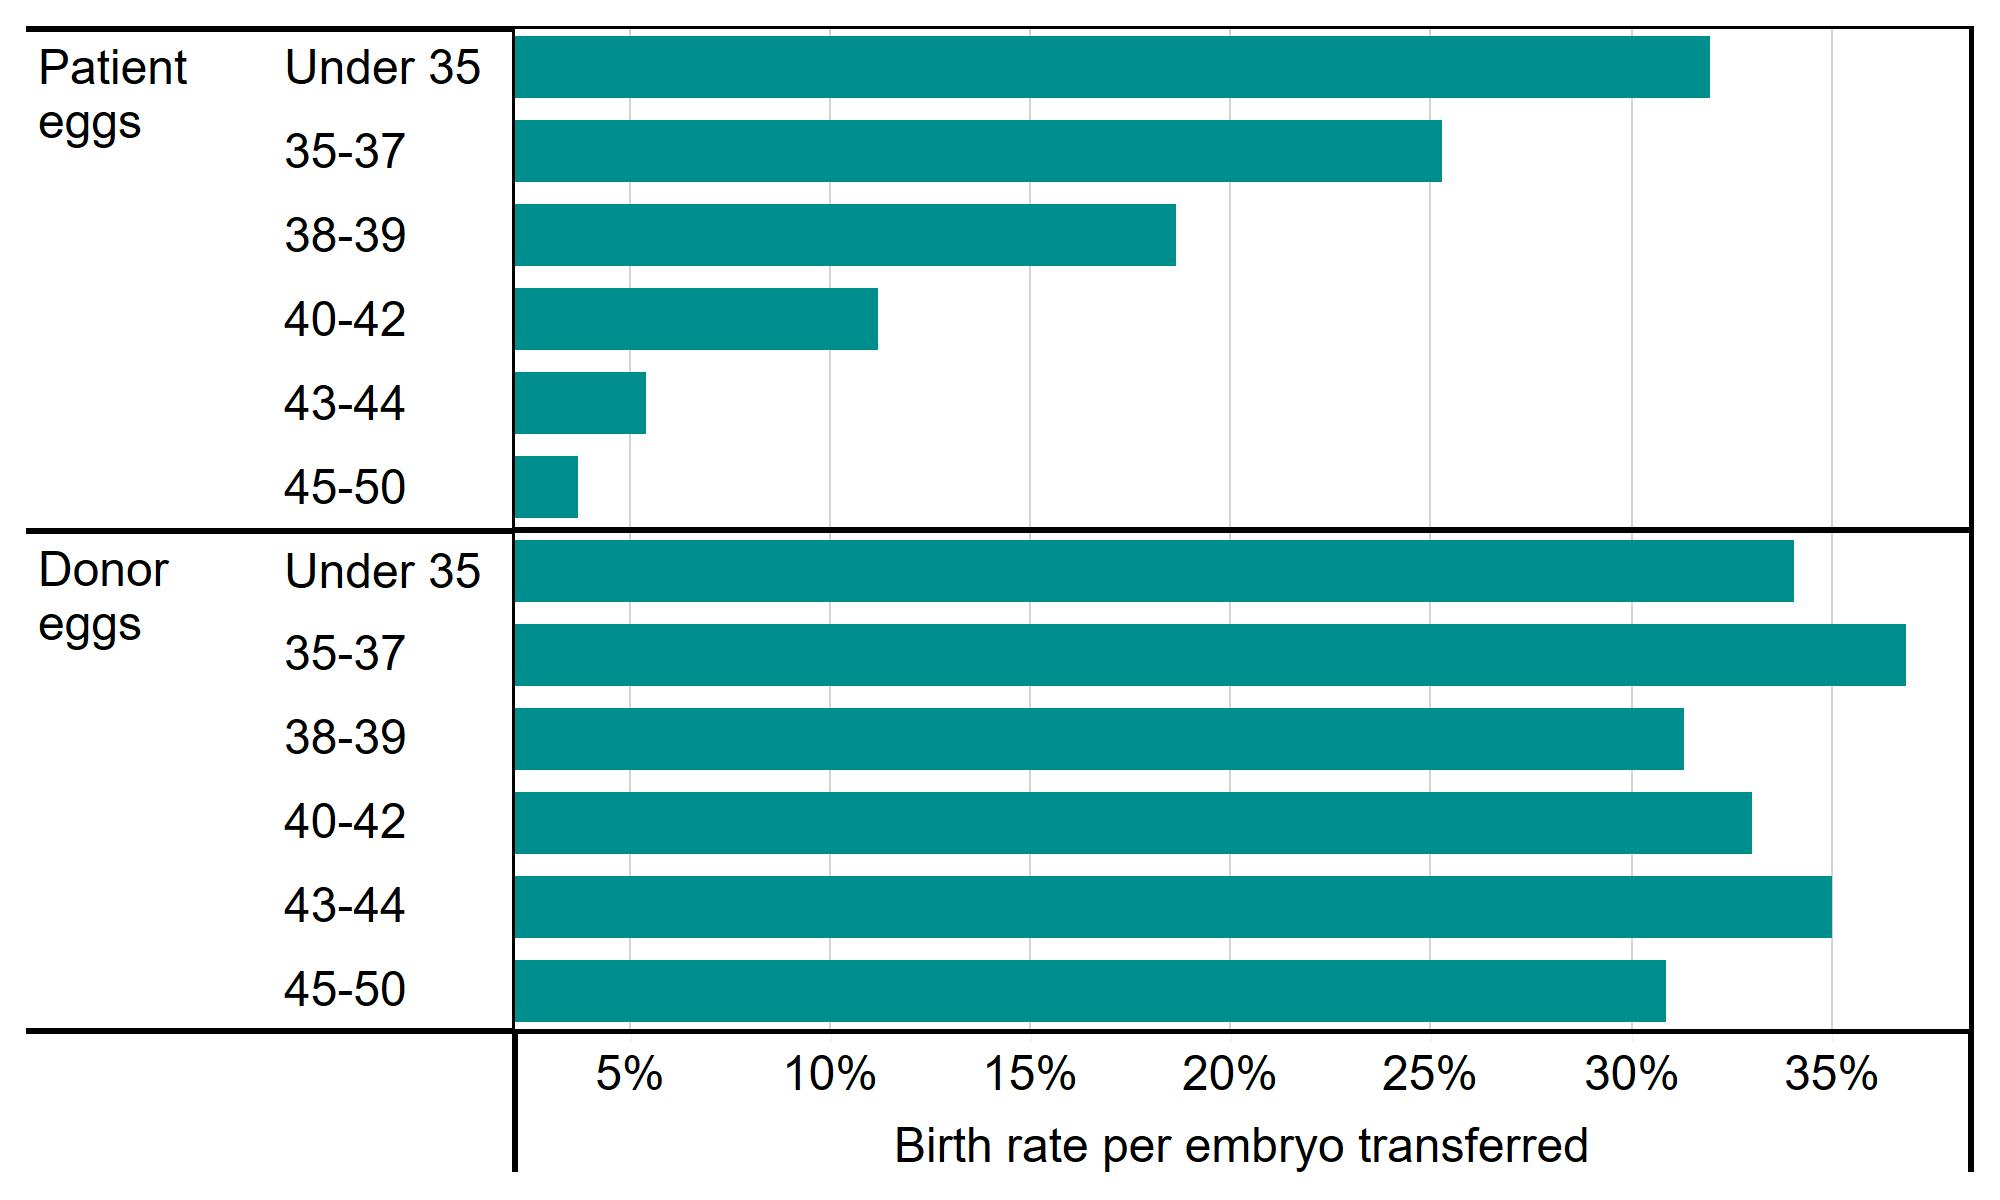 IVF birth rates are above 30% for patients of all ages where donor eggs are used